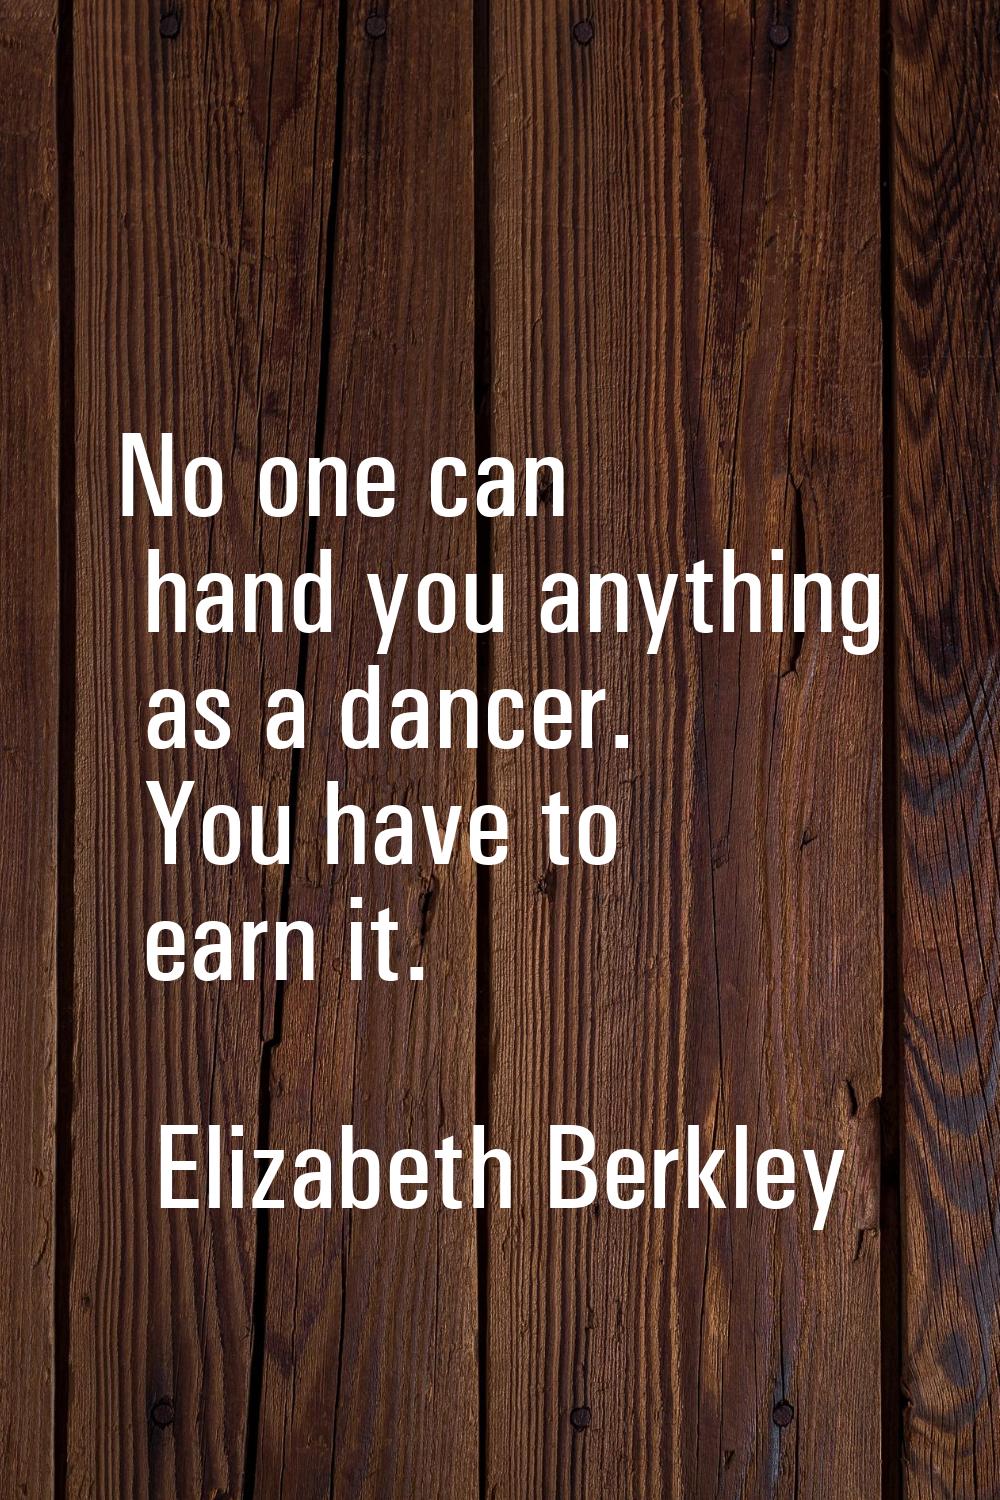 No one can hand you anything as a dancer. You have to earn it.